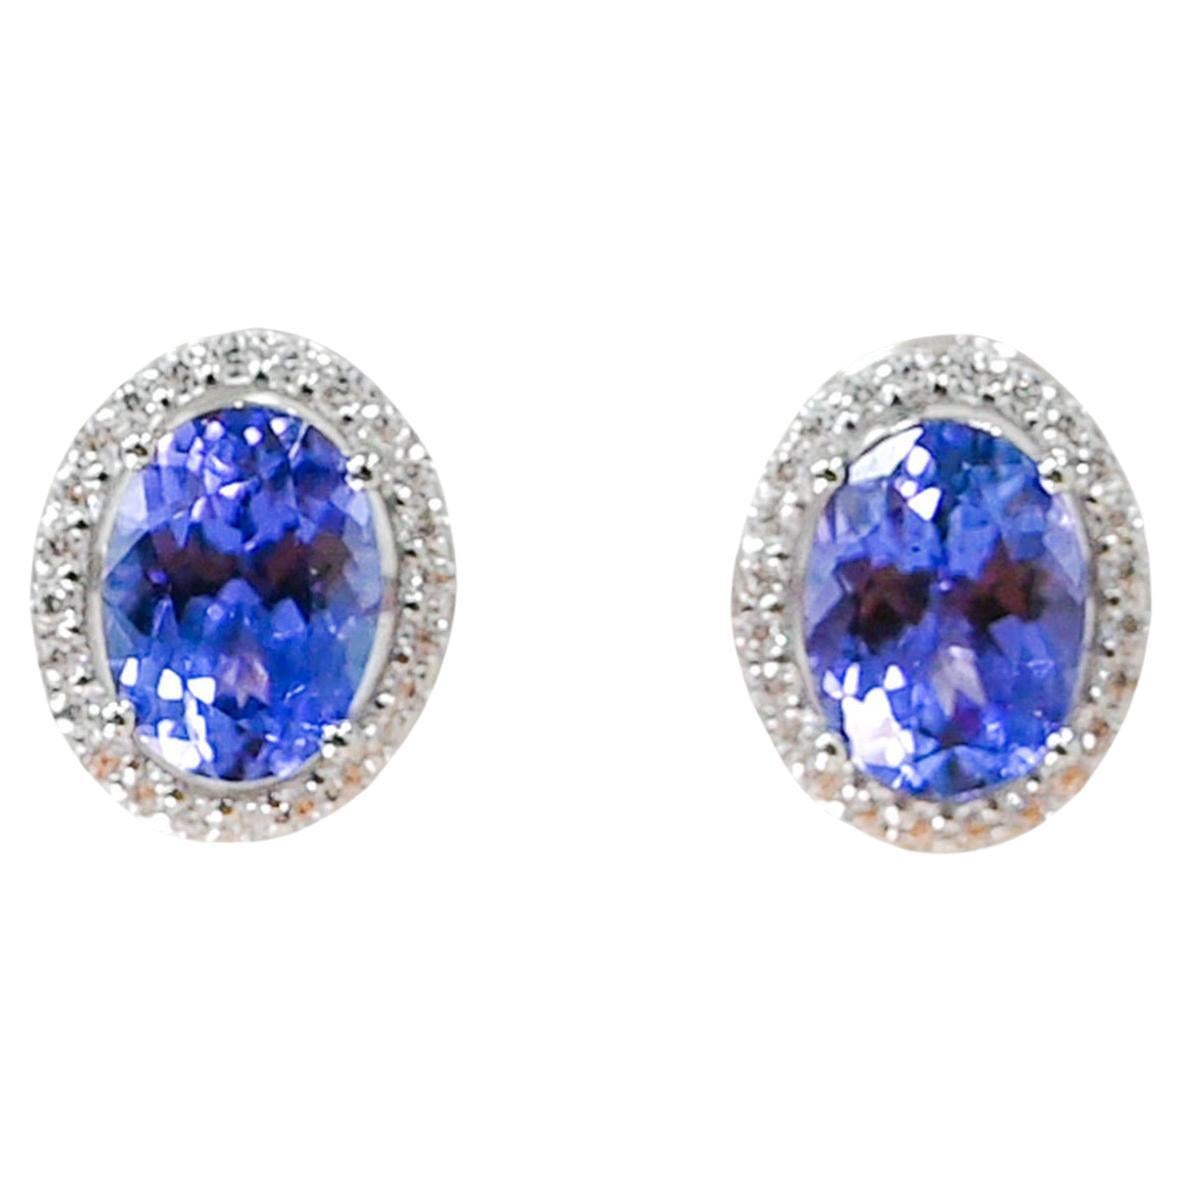 Art Deco Style Tanzanite Stud Earrings with Cz in 925 Sterling Silver Studs For Sale